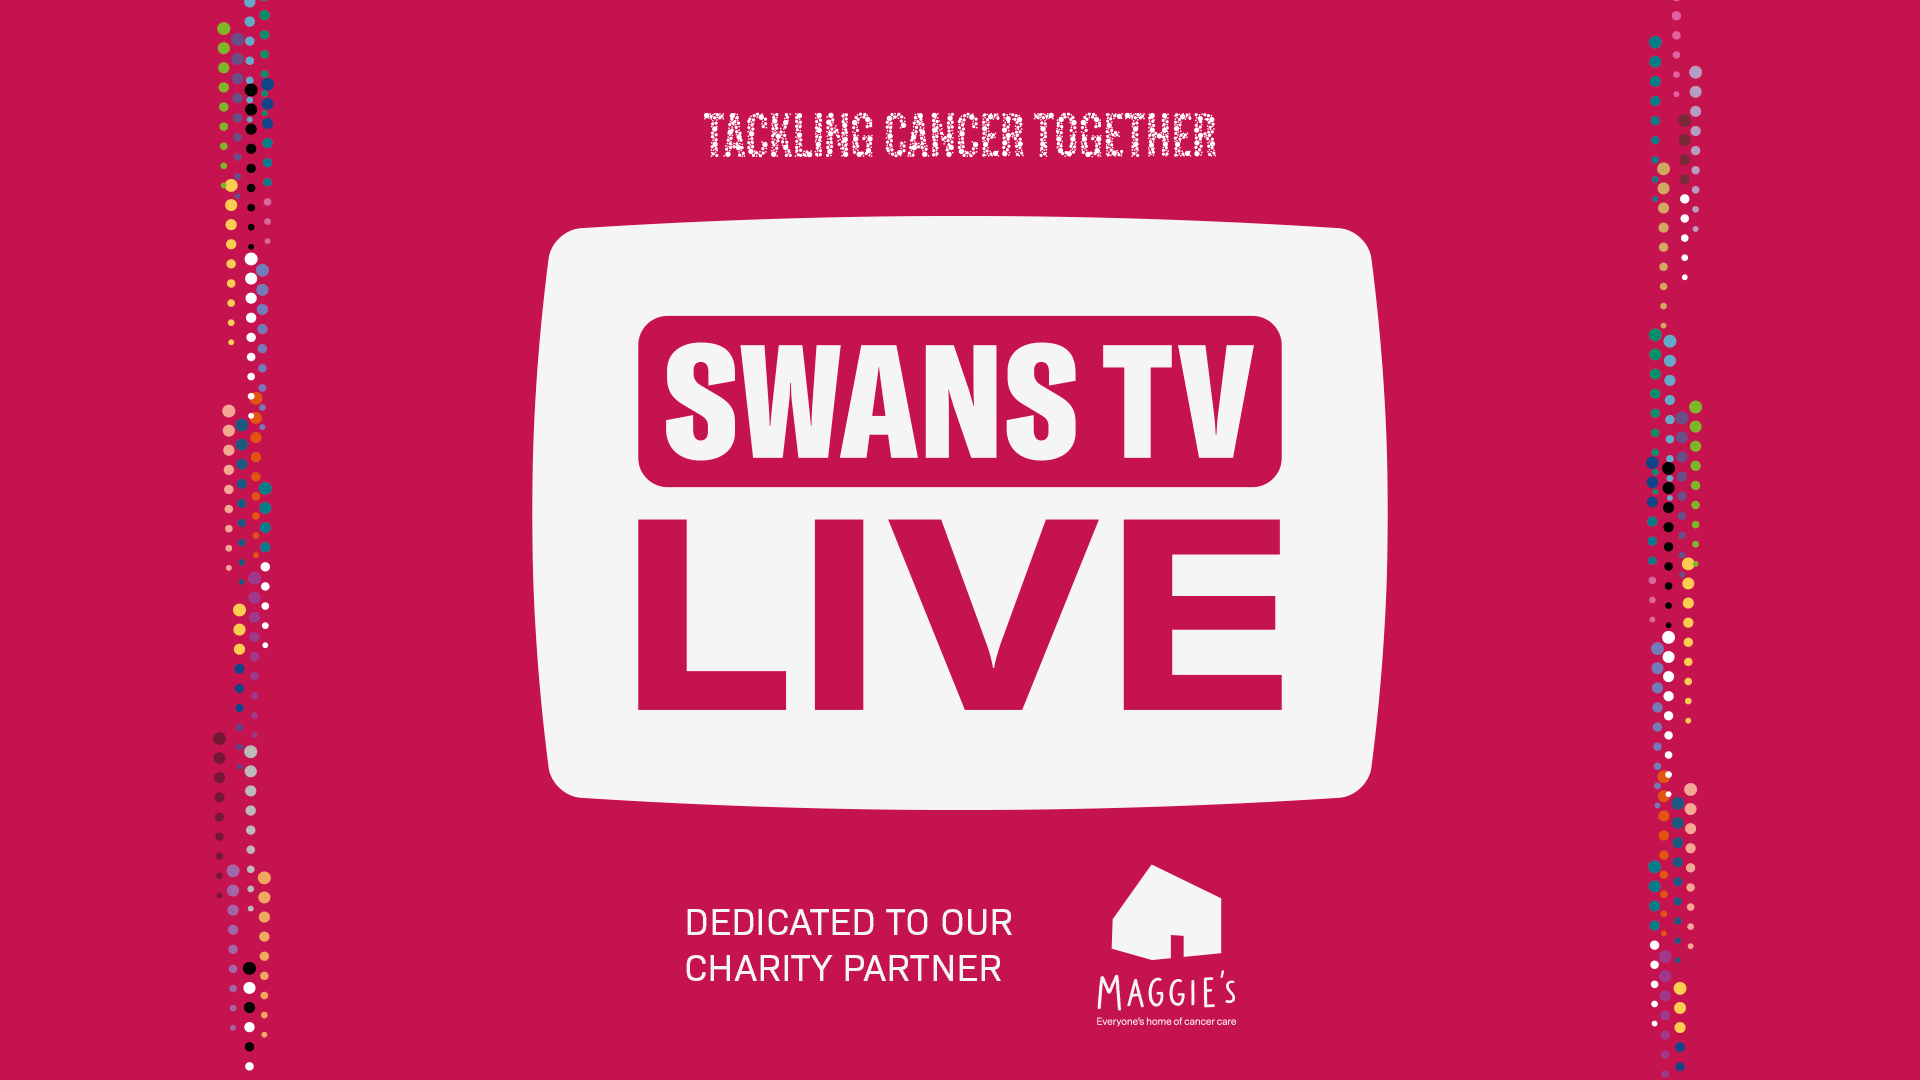 Swans TV live graphic - proudly supporting Maggie's